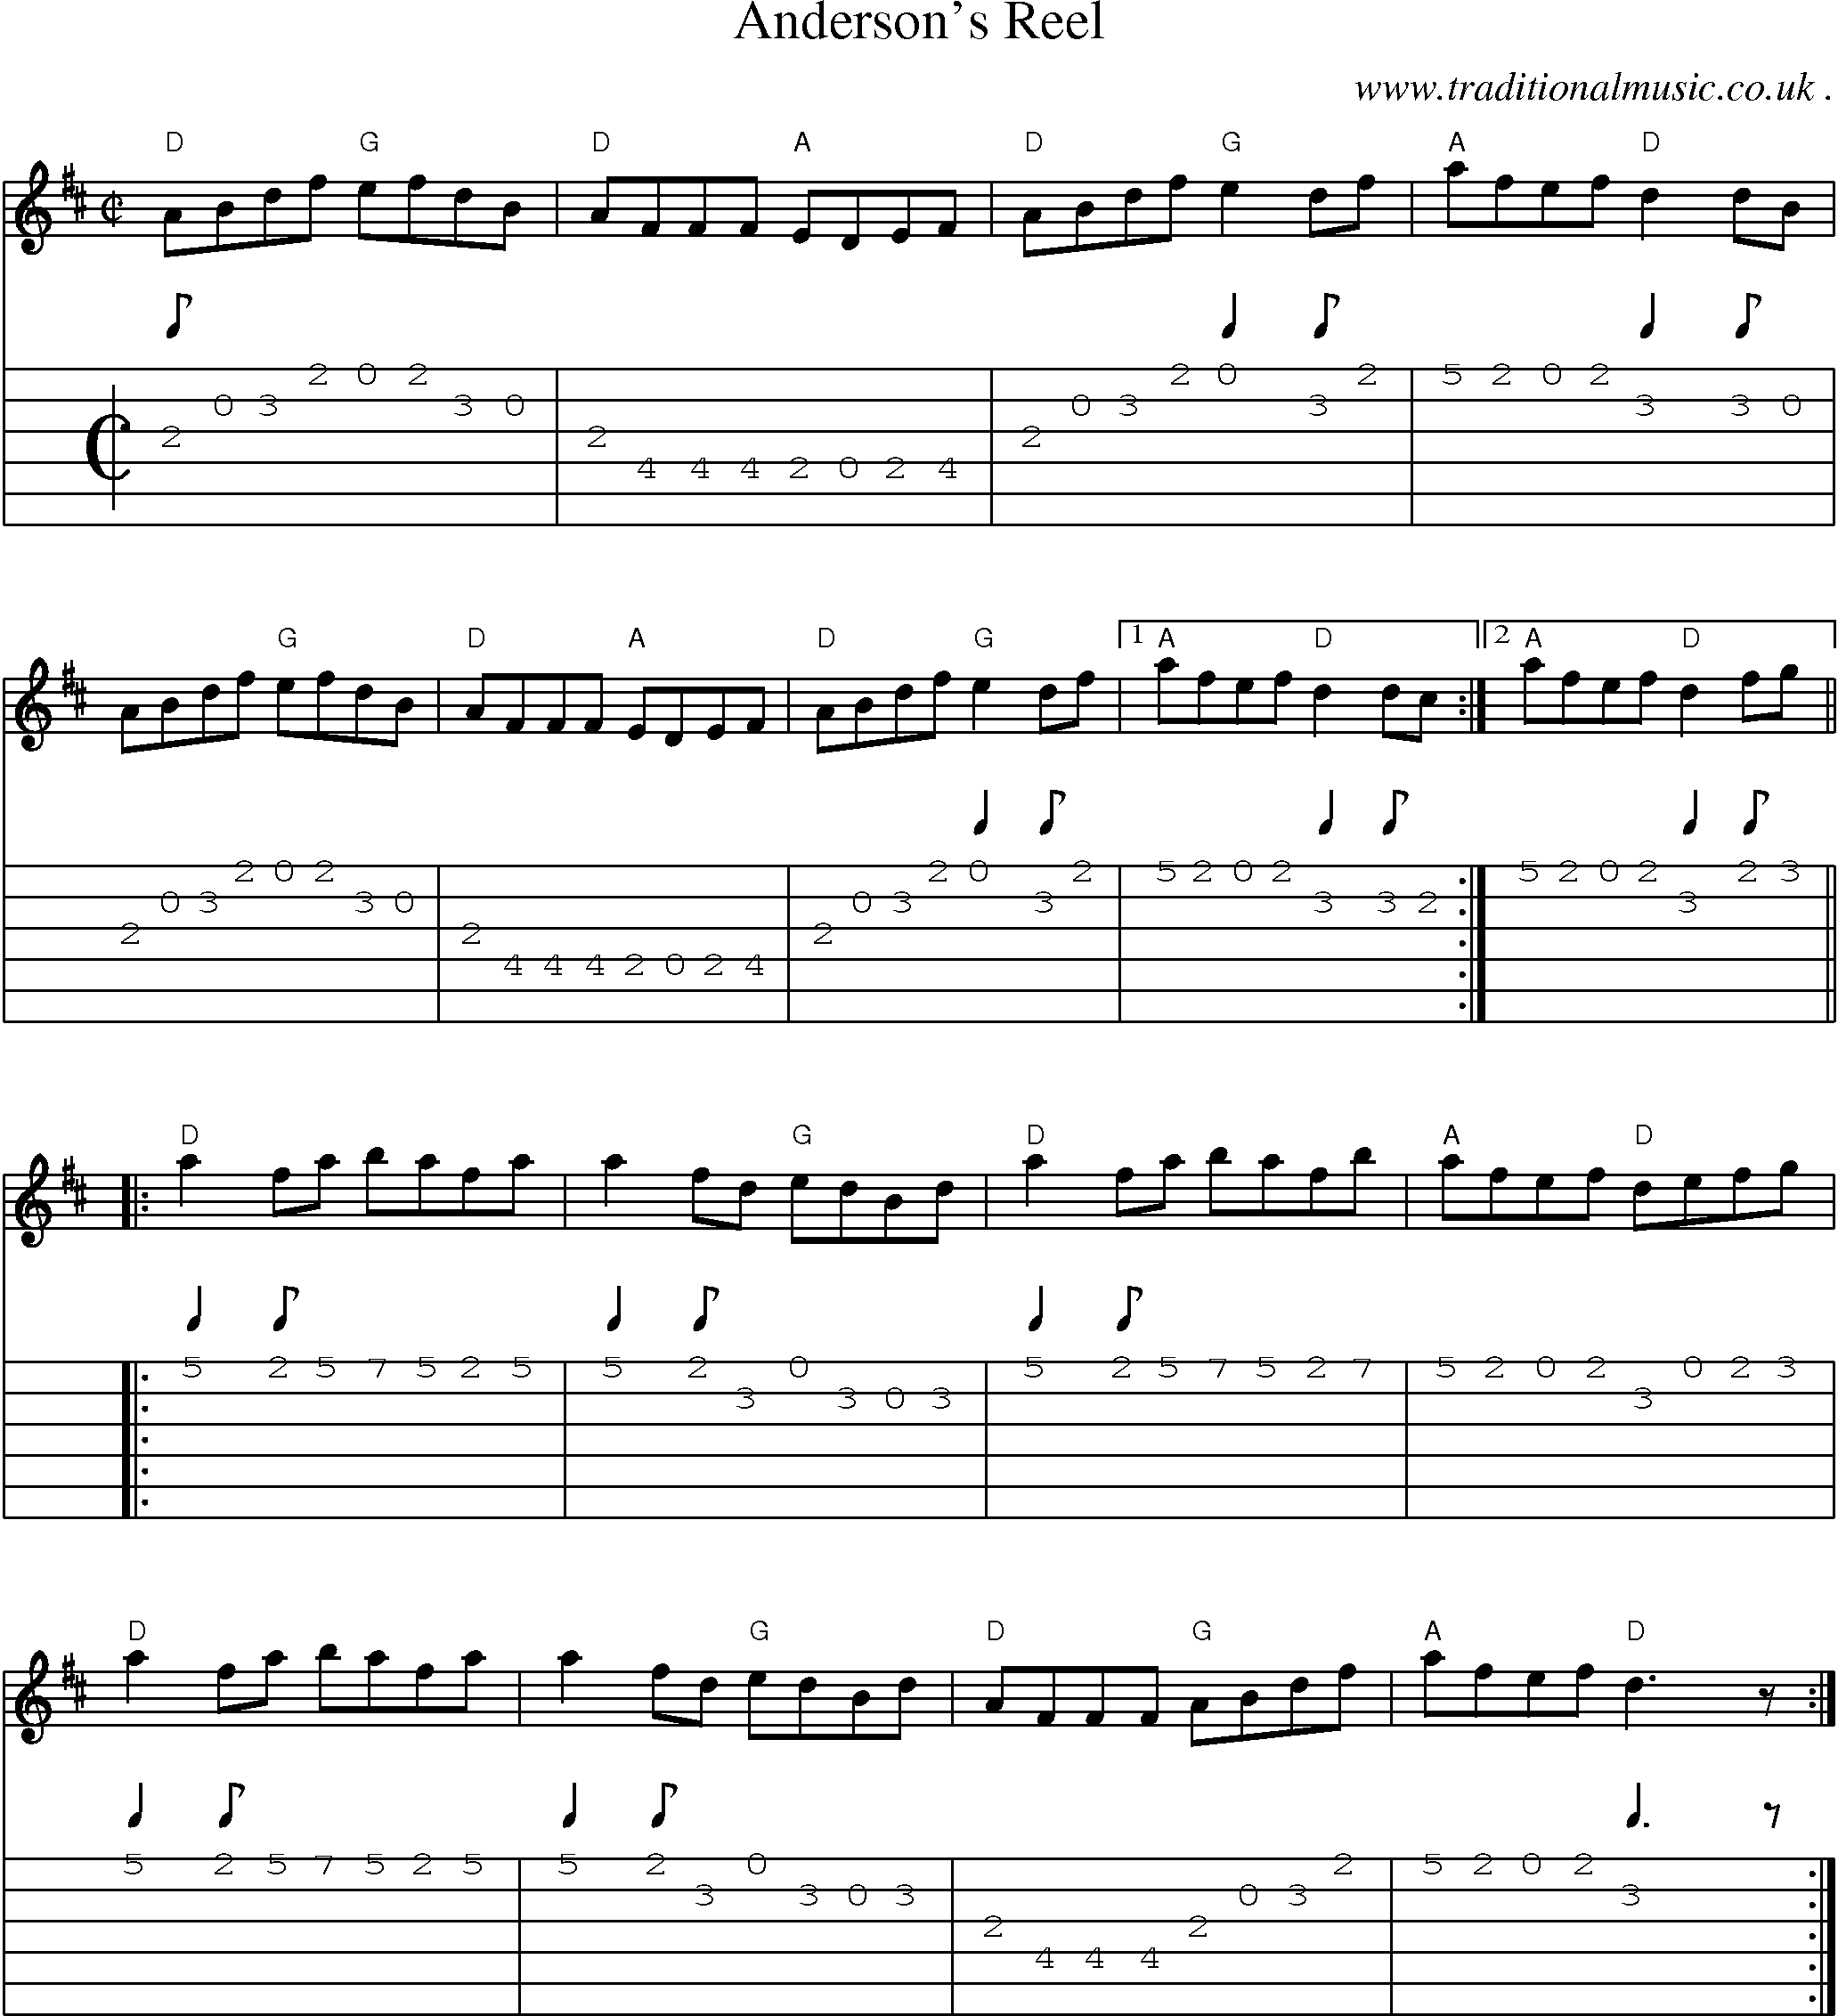 Music Score and Guitar Tabs for Andersons Reel